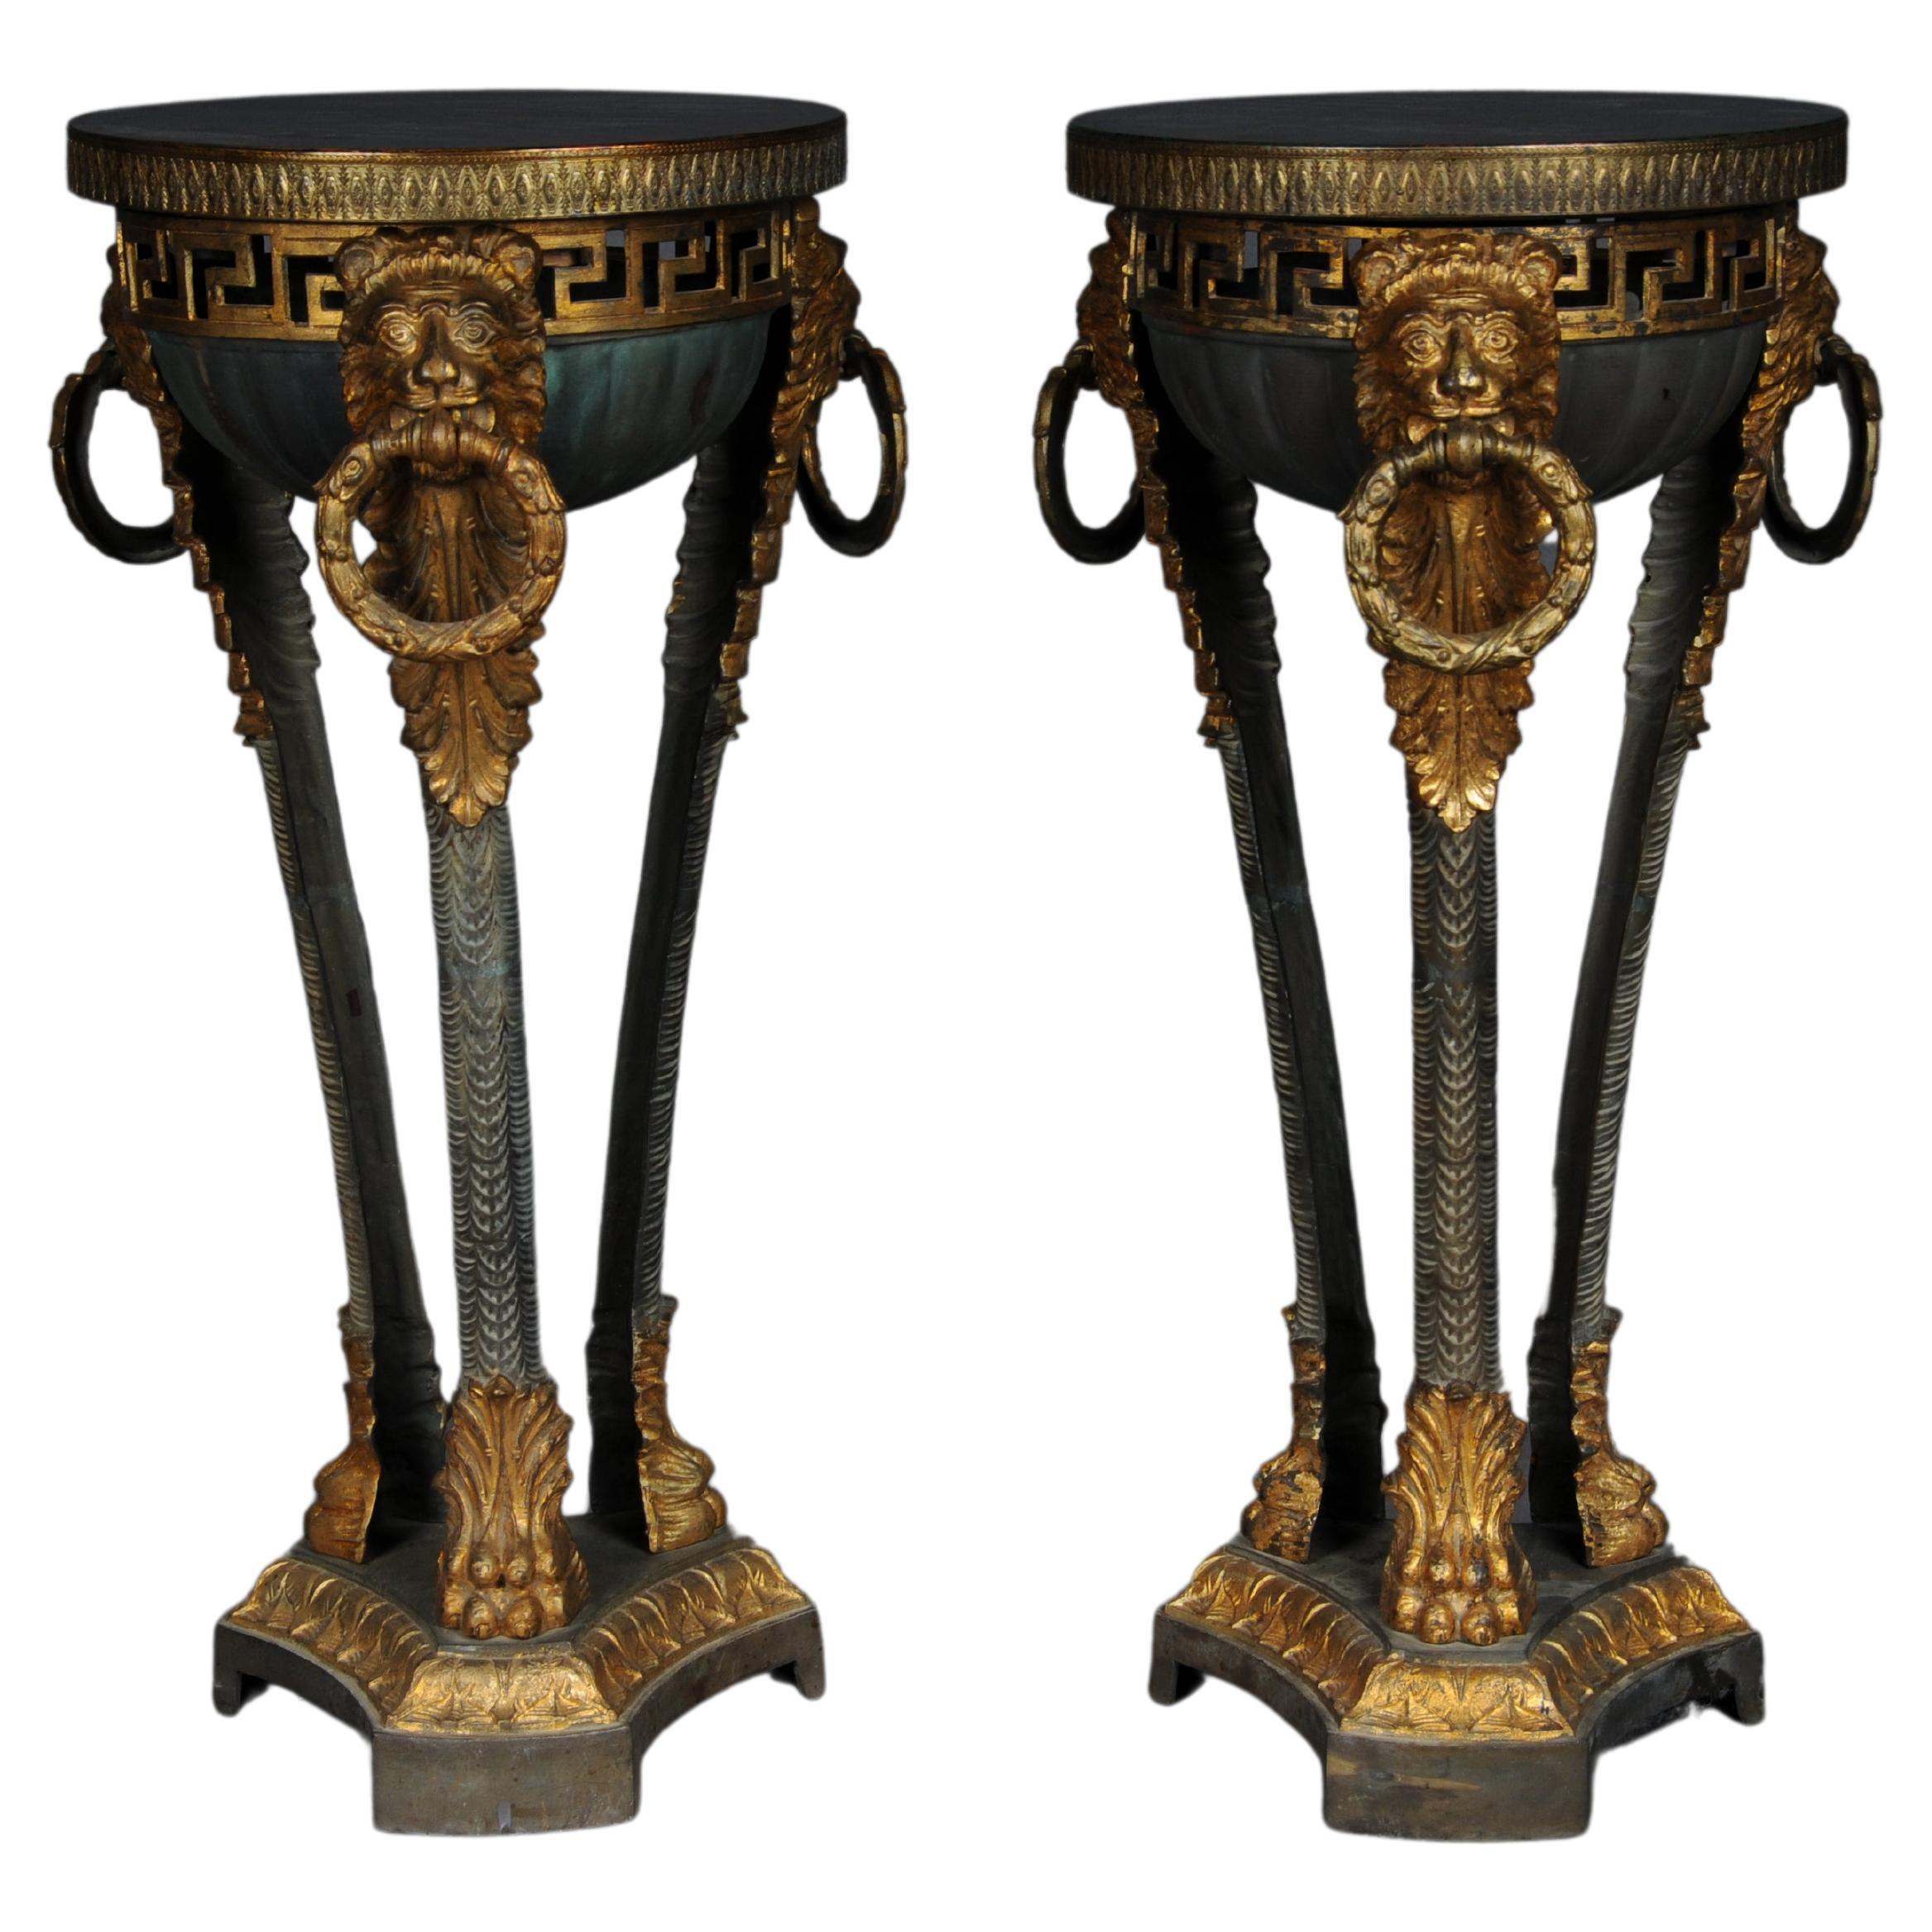 Pair (2) antique gueridons/floral columns in Athens, France, 19th century